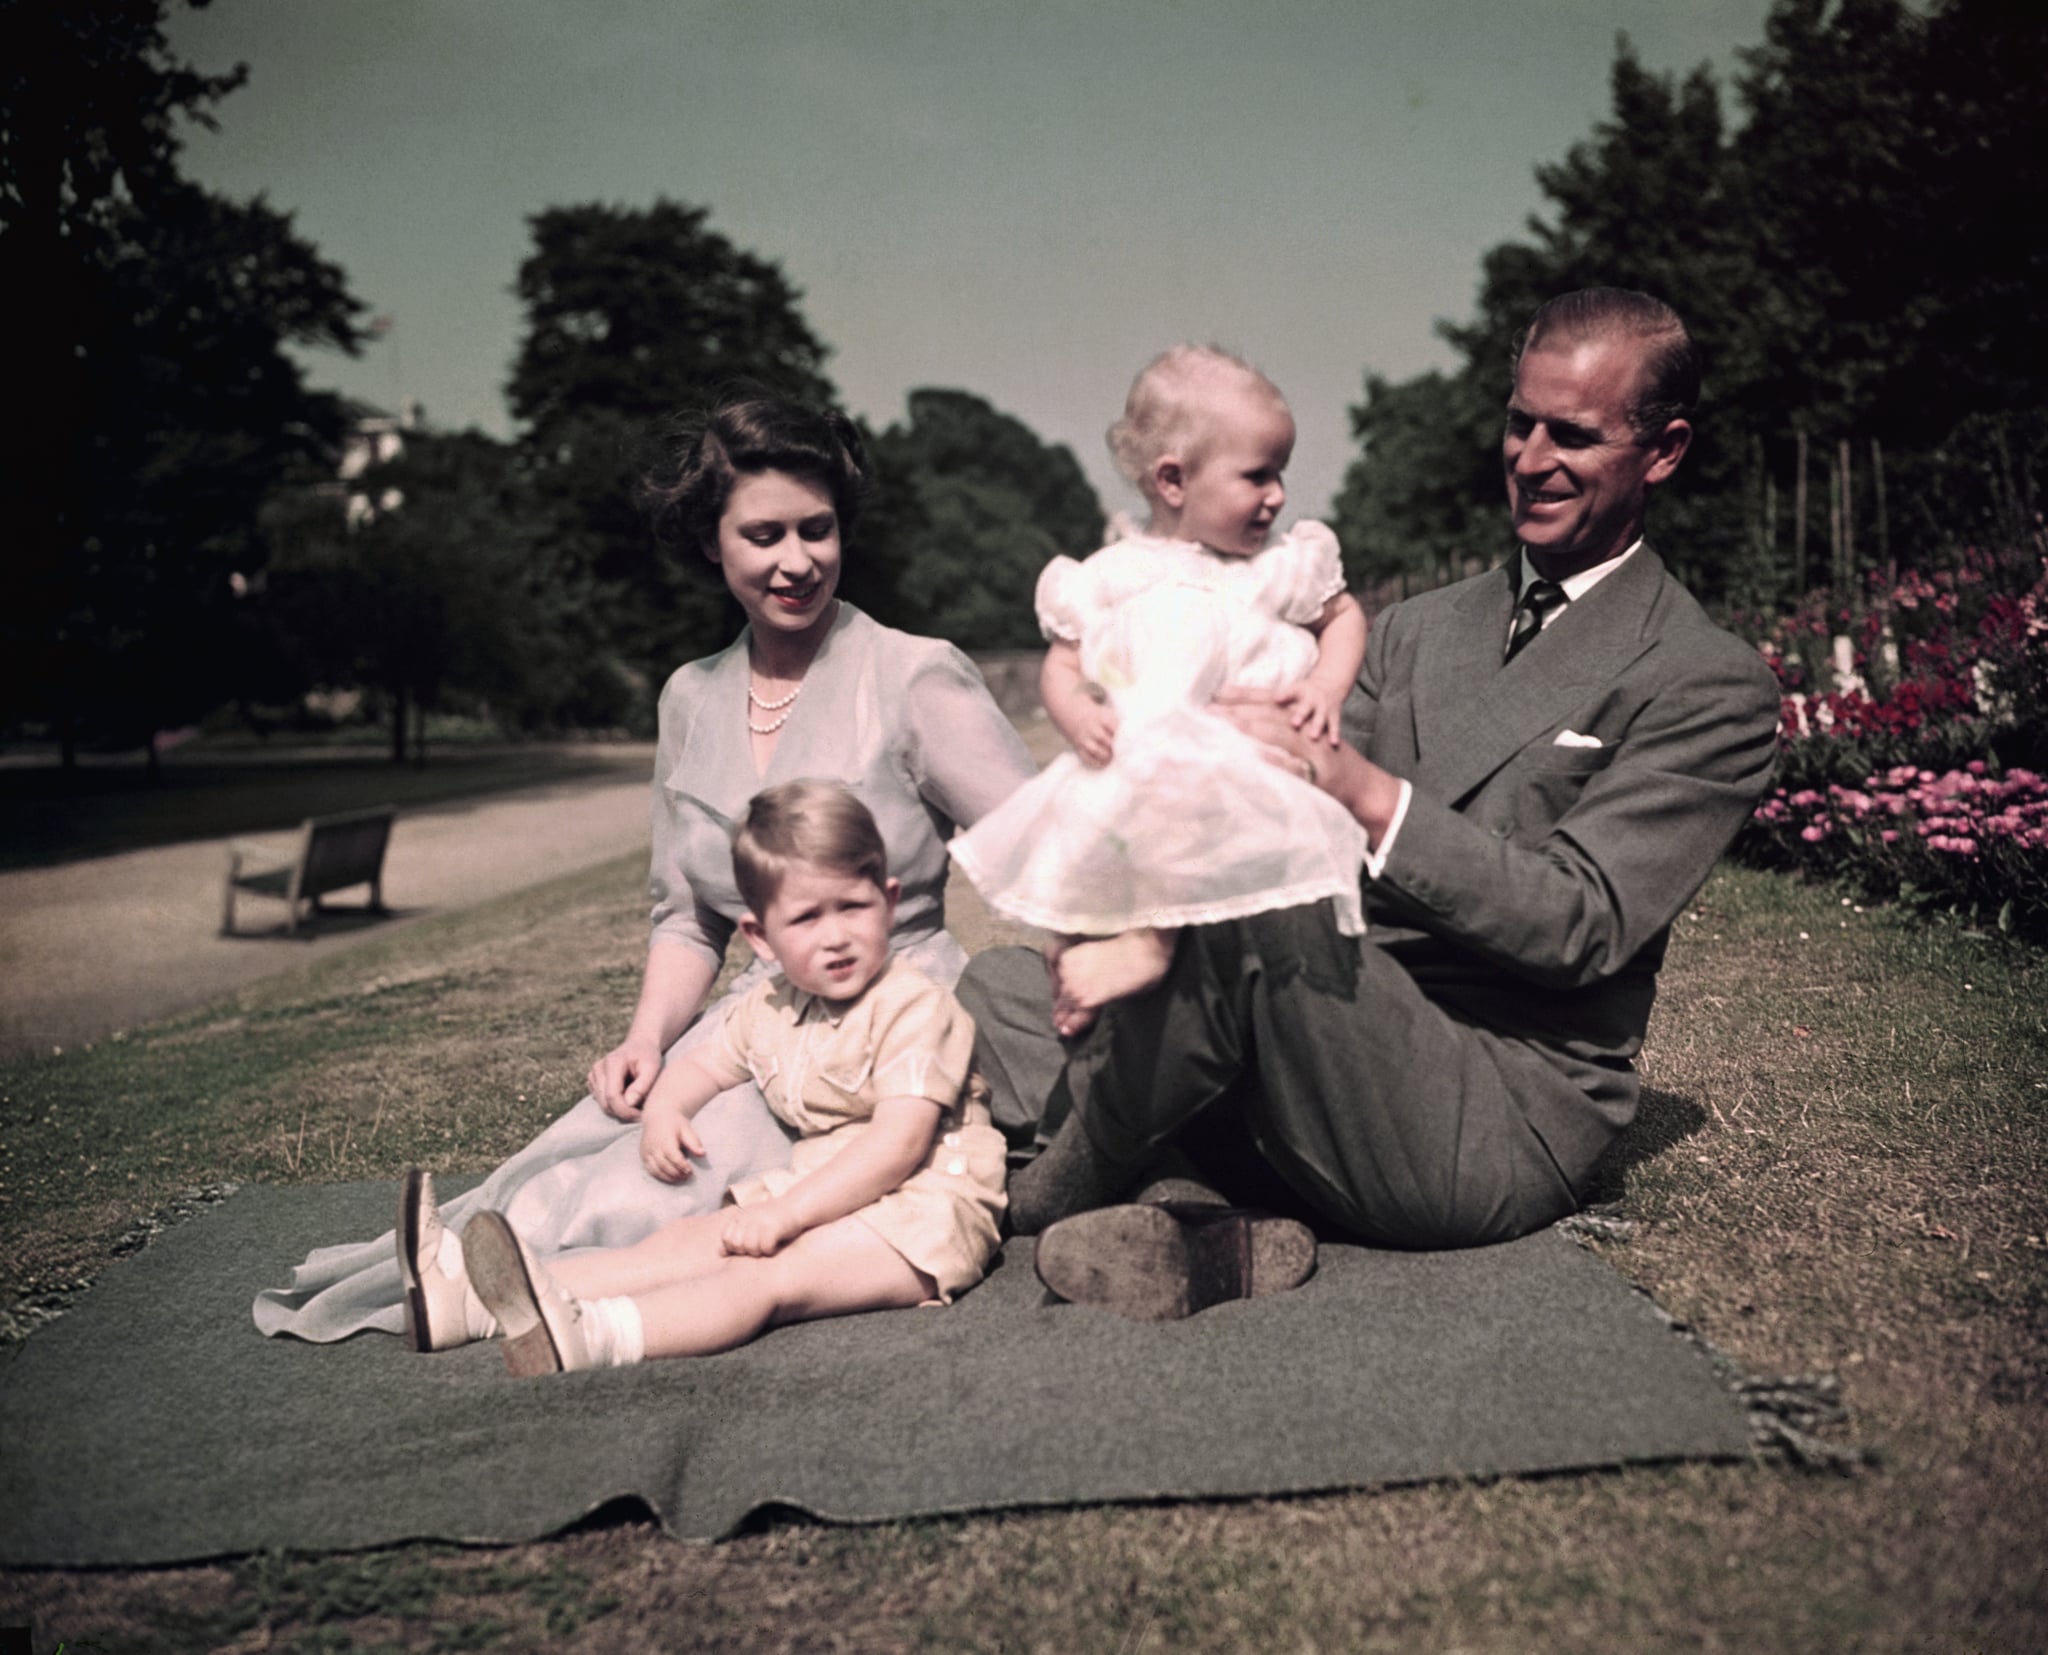 Queen Elizabeth and Prince Philip picnicking in 1953.